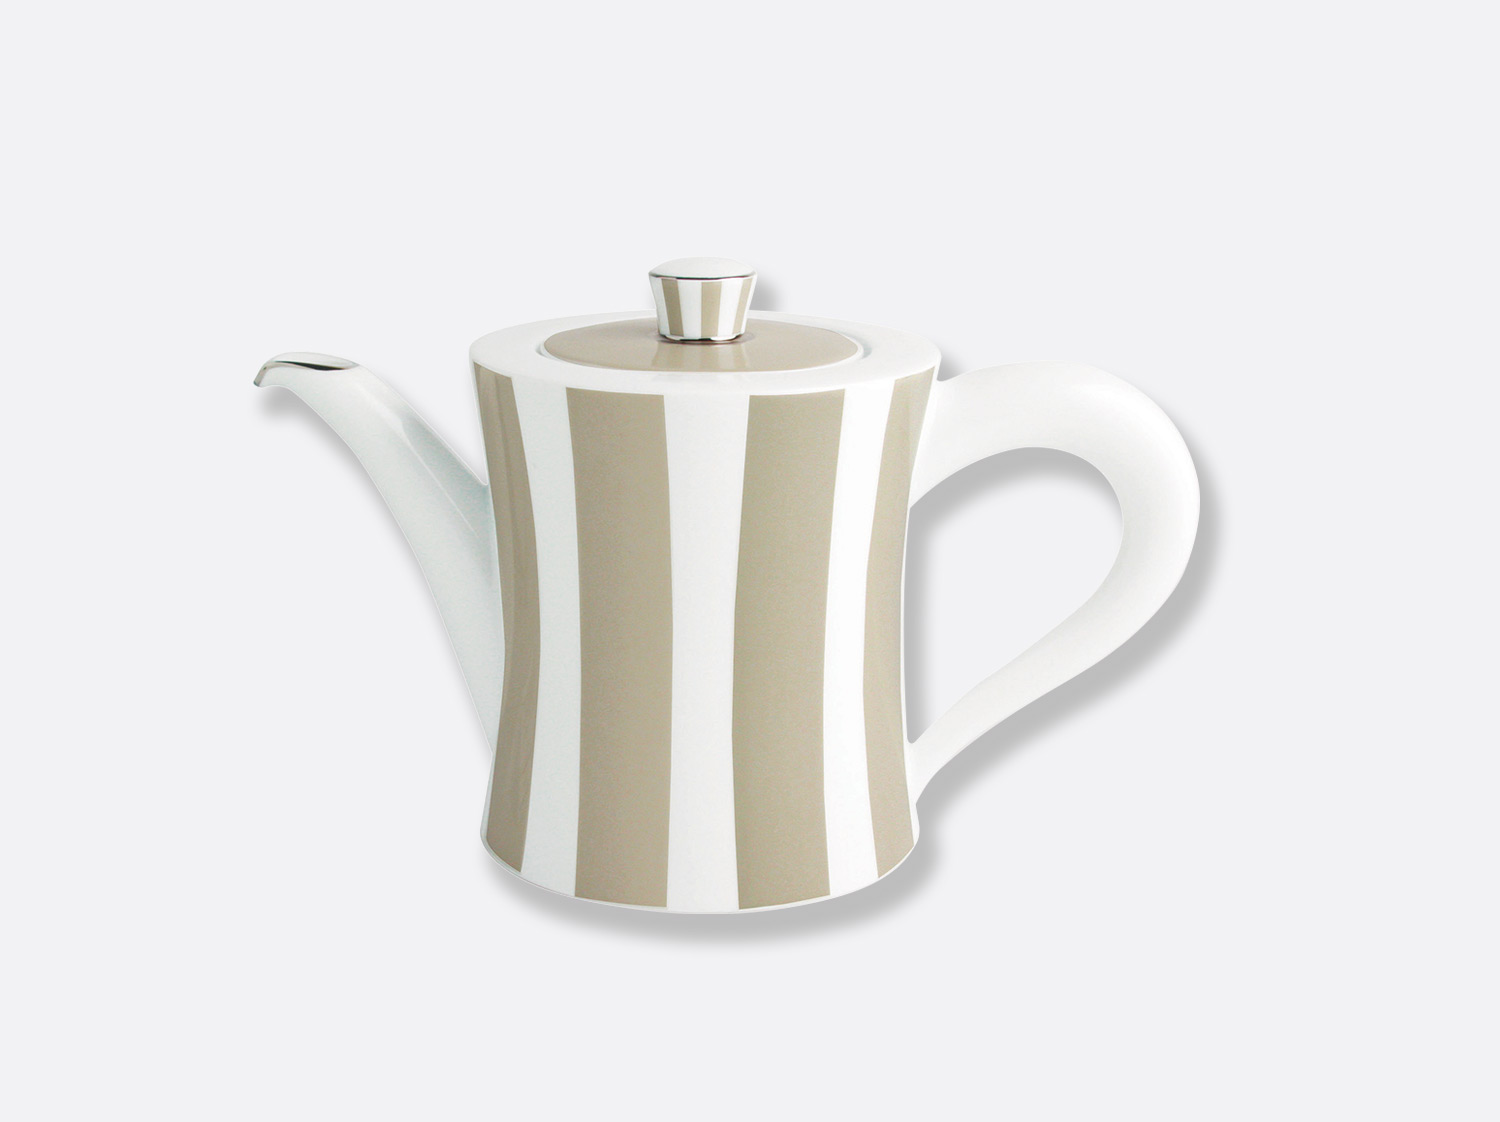 China Hot beverage server 12 cups 33.8 oz of the collection Galerie royale linen | Bernardaud